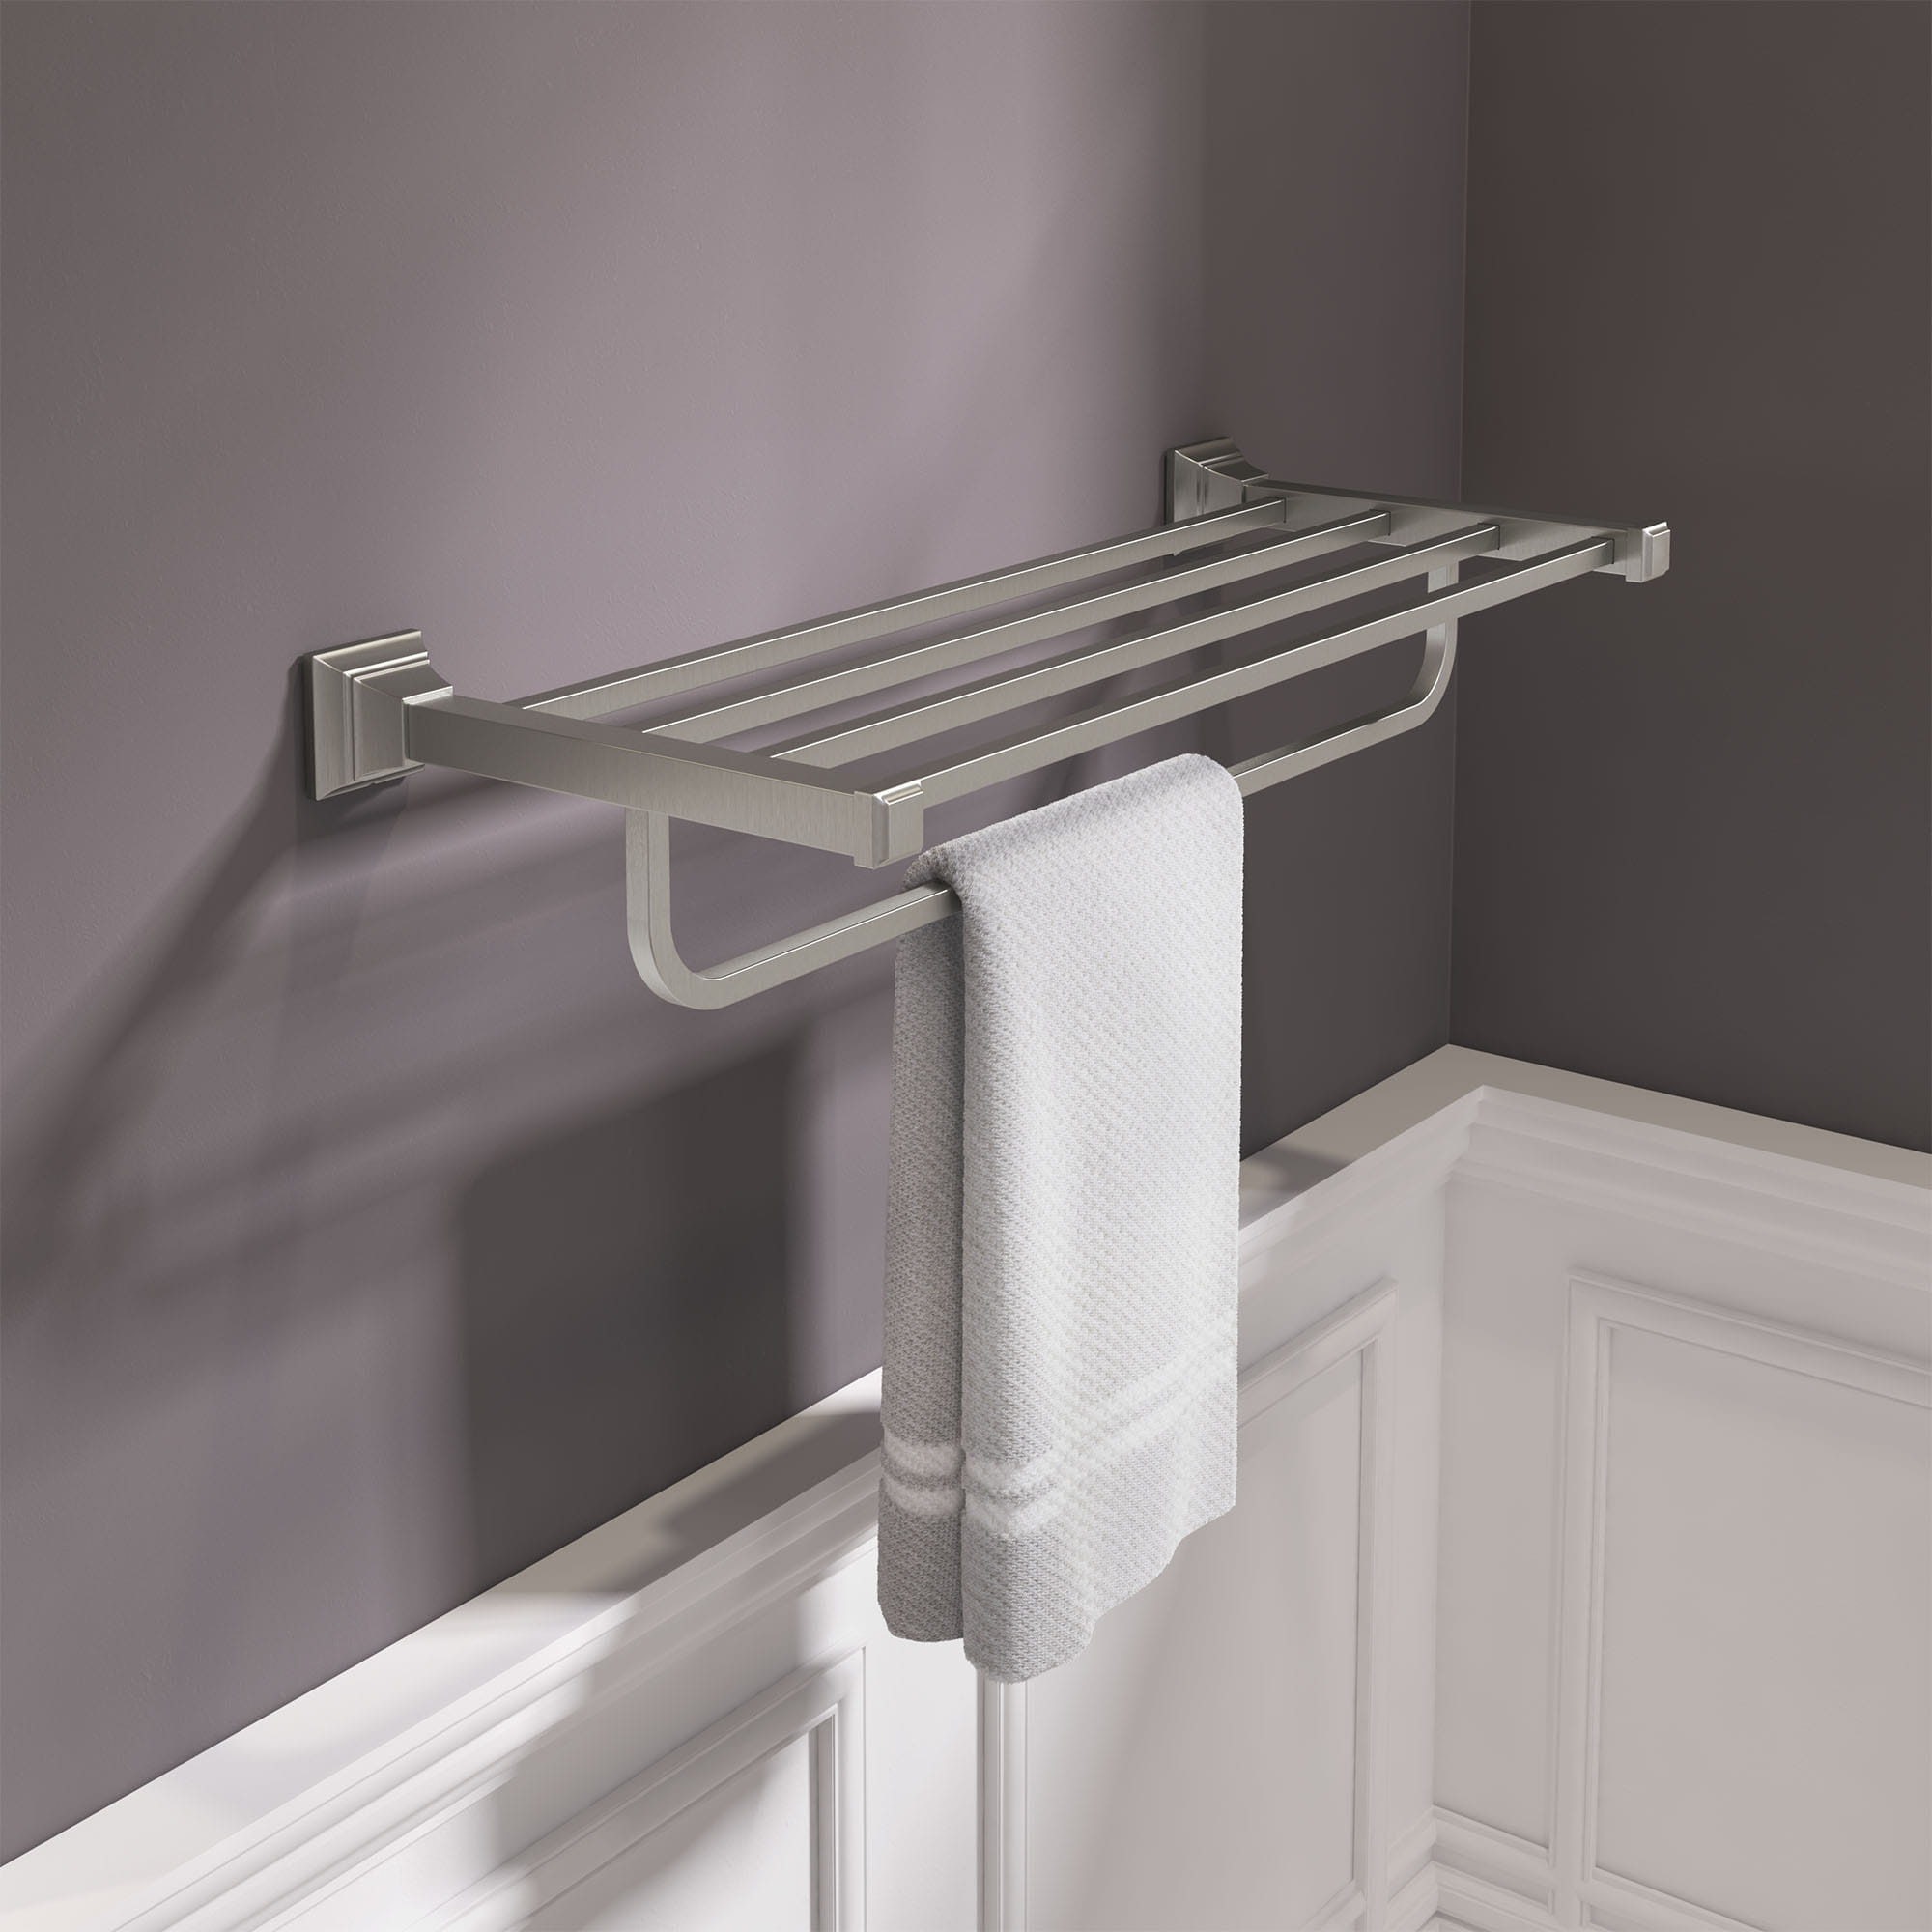 Town Square S 24 Inch Train Rack   BRUSHED NICKEL